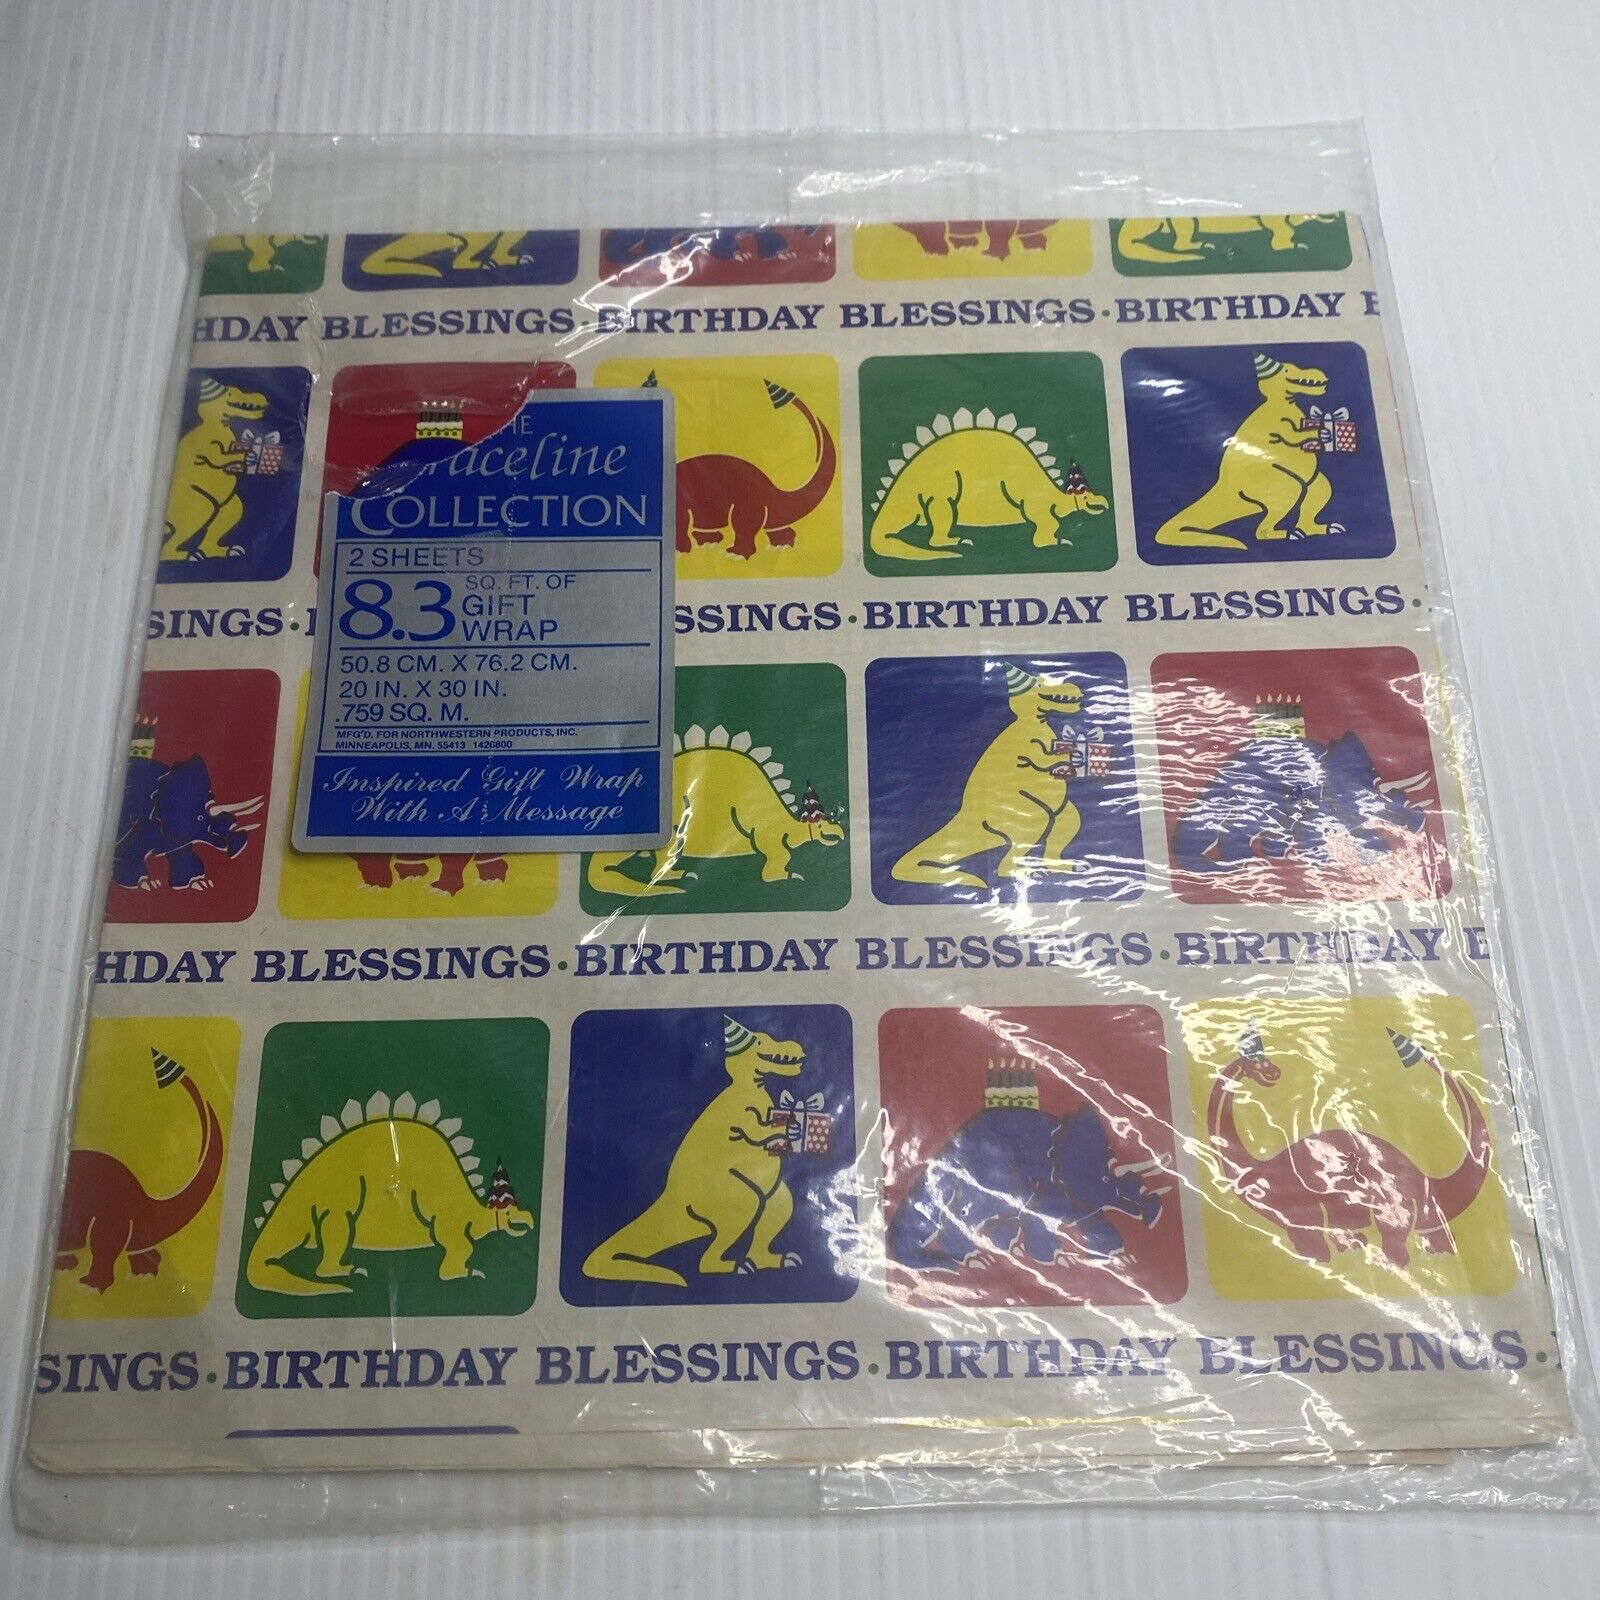 NOS 1986 DINOSAUR BIRTHDAY BLESSINGS Vintage Wrapping Paper Gift Wrap